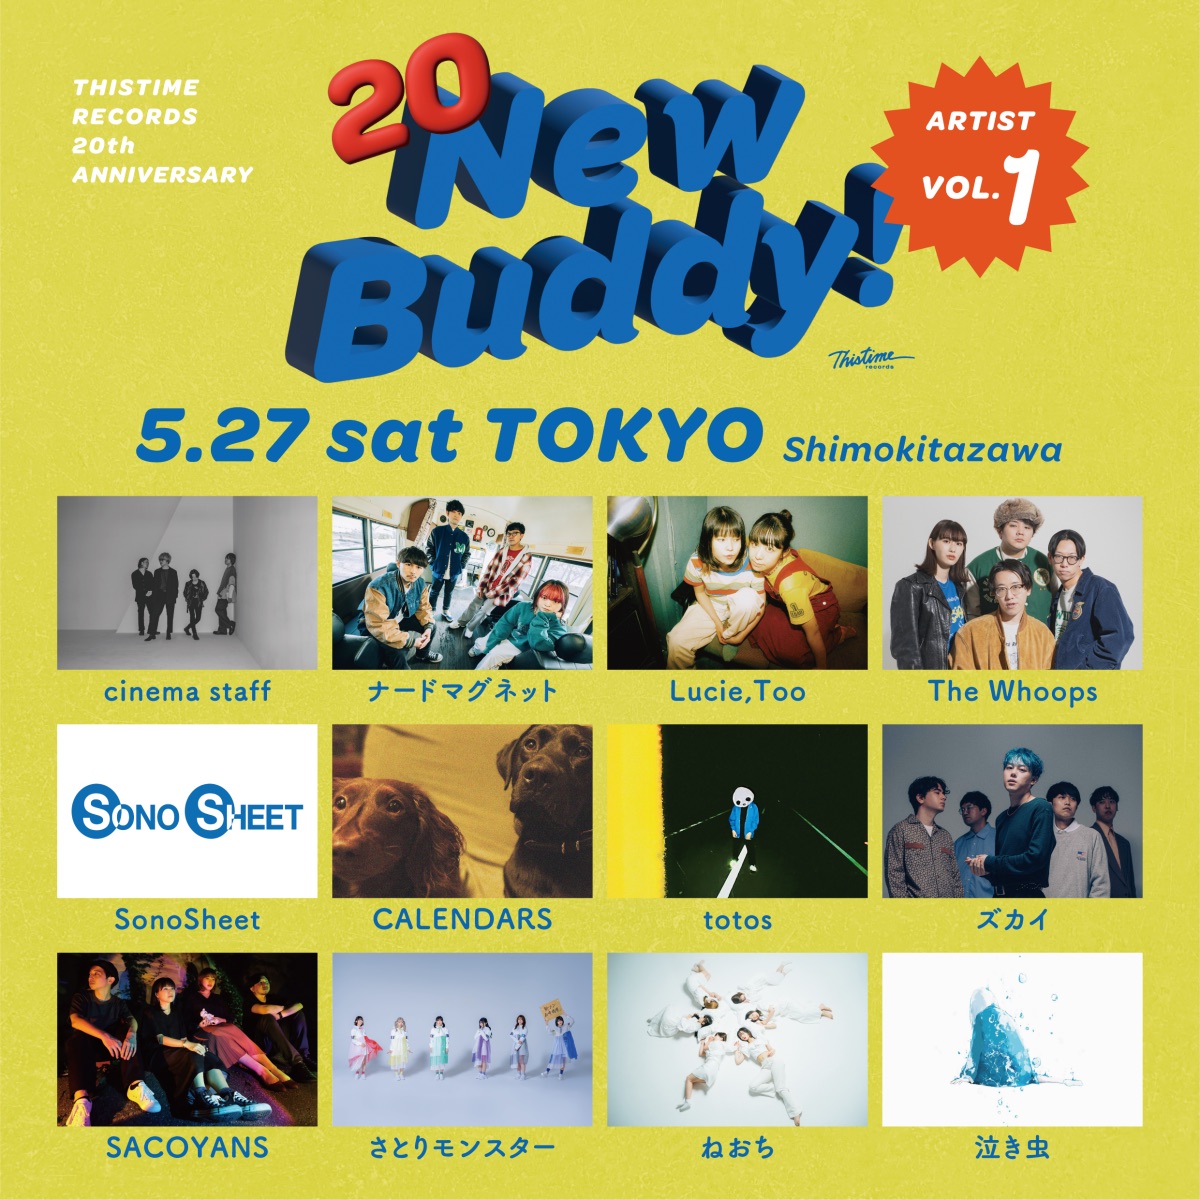 THISTIME RECORDS 20th Anniversary "New Buddy!"